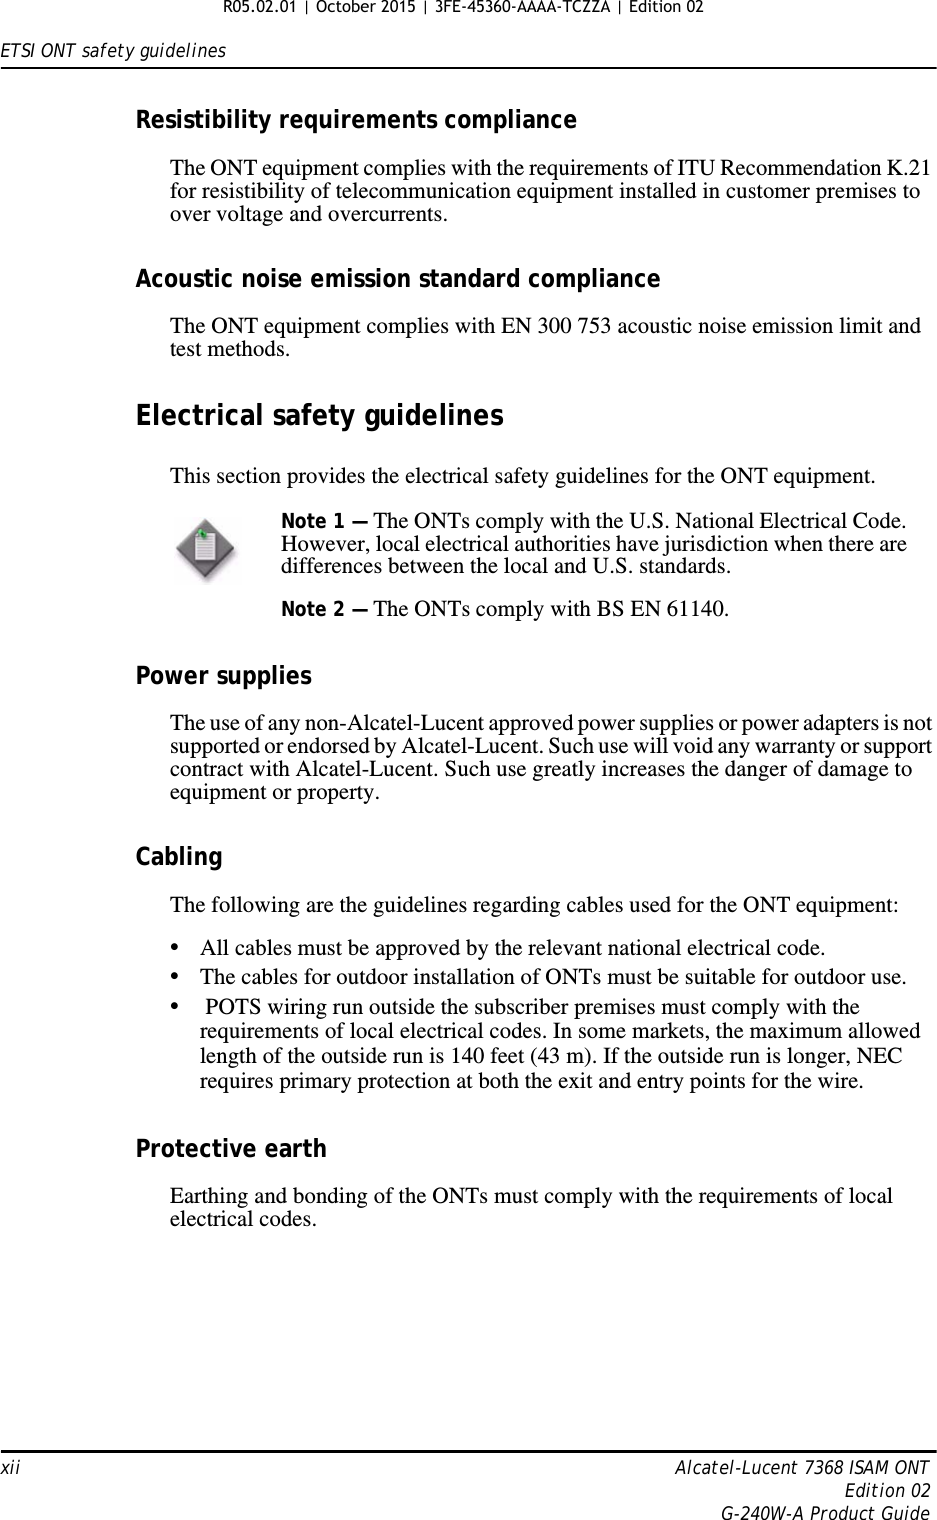 ETSI ONT safety guidelinesxii Alcatel-Lucent 7368 ISAM ONTEdition 02G-240W-A Product GuideResistibility requirements complianceThe ONT equipment complies with the requirements of ITU Recommendation K.21 for resistibility of telecommunication equipment installed in customer premises to over voltage and overcurrents.Acoustic noise emission standard complianceThe ONT equipment complies with EN 300 753 acoustic noise emission limit and test methods. Electrical safety guidelinesThis section provides the electrical safety guidelines for the ONT equipment.Power suppliesThe use of any non-Alcatel-Lucent approved power supplies or power adapters is not supported or endorsed by Alcatel-Lucent. Such use will void any warranty or support contract with Alcatel-Lucent. Such use greatly increases the danger of damage to equipment or property.CablingThe following are the guidelines regarding cables used for the ONT equipment:•All cables must be approved by the relevant national electrical code.•The cables for outdoor installation of ONTs must be suitable for outdoor use.• POTS wiring run outside the subscriber premises must comply with the requirements of local electrical codes. In some markets, the maximum allowed length of the outside run is 140 feet (43 m). If the outside run is longer, NEC requires primary protection at both the exit and entry points for the wire.Protective earthEarthing and bonding of the ONTs must comply with the requirements of local electrical codes.Note 1 — The ONTs comply with the U.S. National Electrical Code. However, local electrical authorities have jurisdiction when there are differences between the local and U.S. standards.Note 2 — The ONTs comply with BS EN 61140. R05.02.01 | October 2015 | 3FE-45360-AAAA-TCZZA | Edition 02 